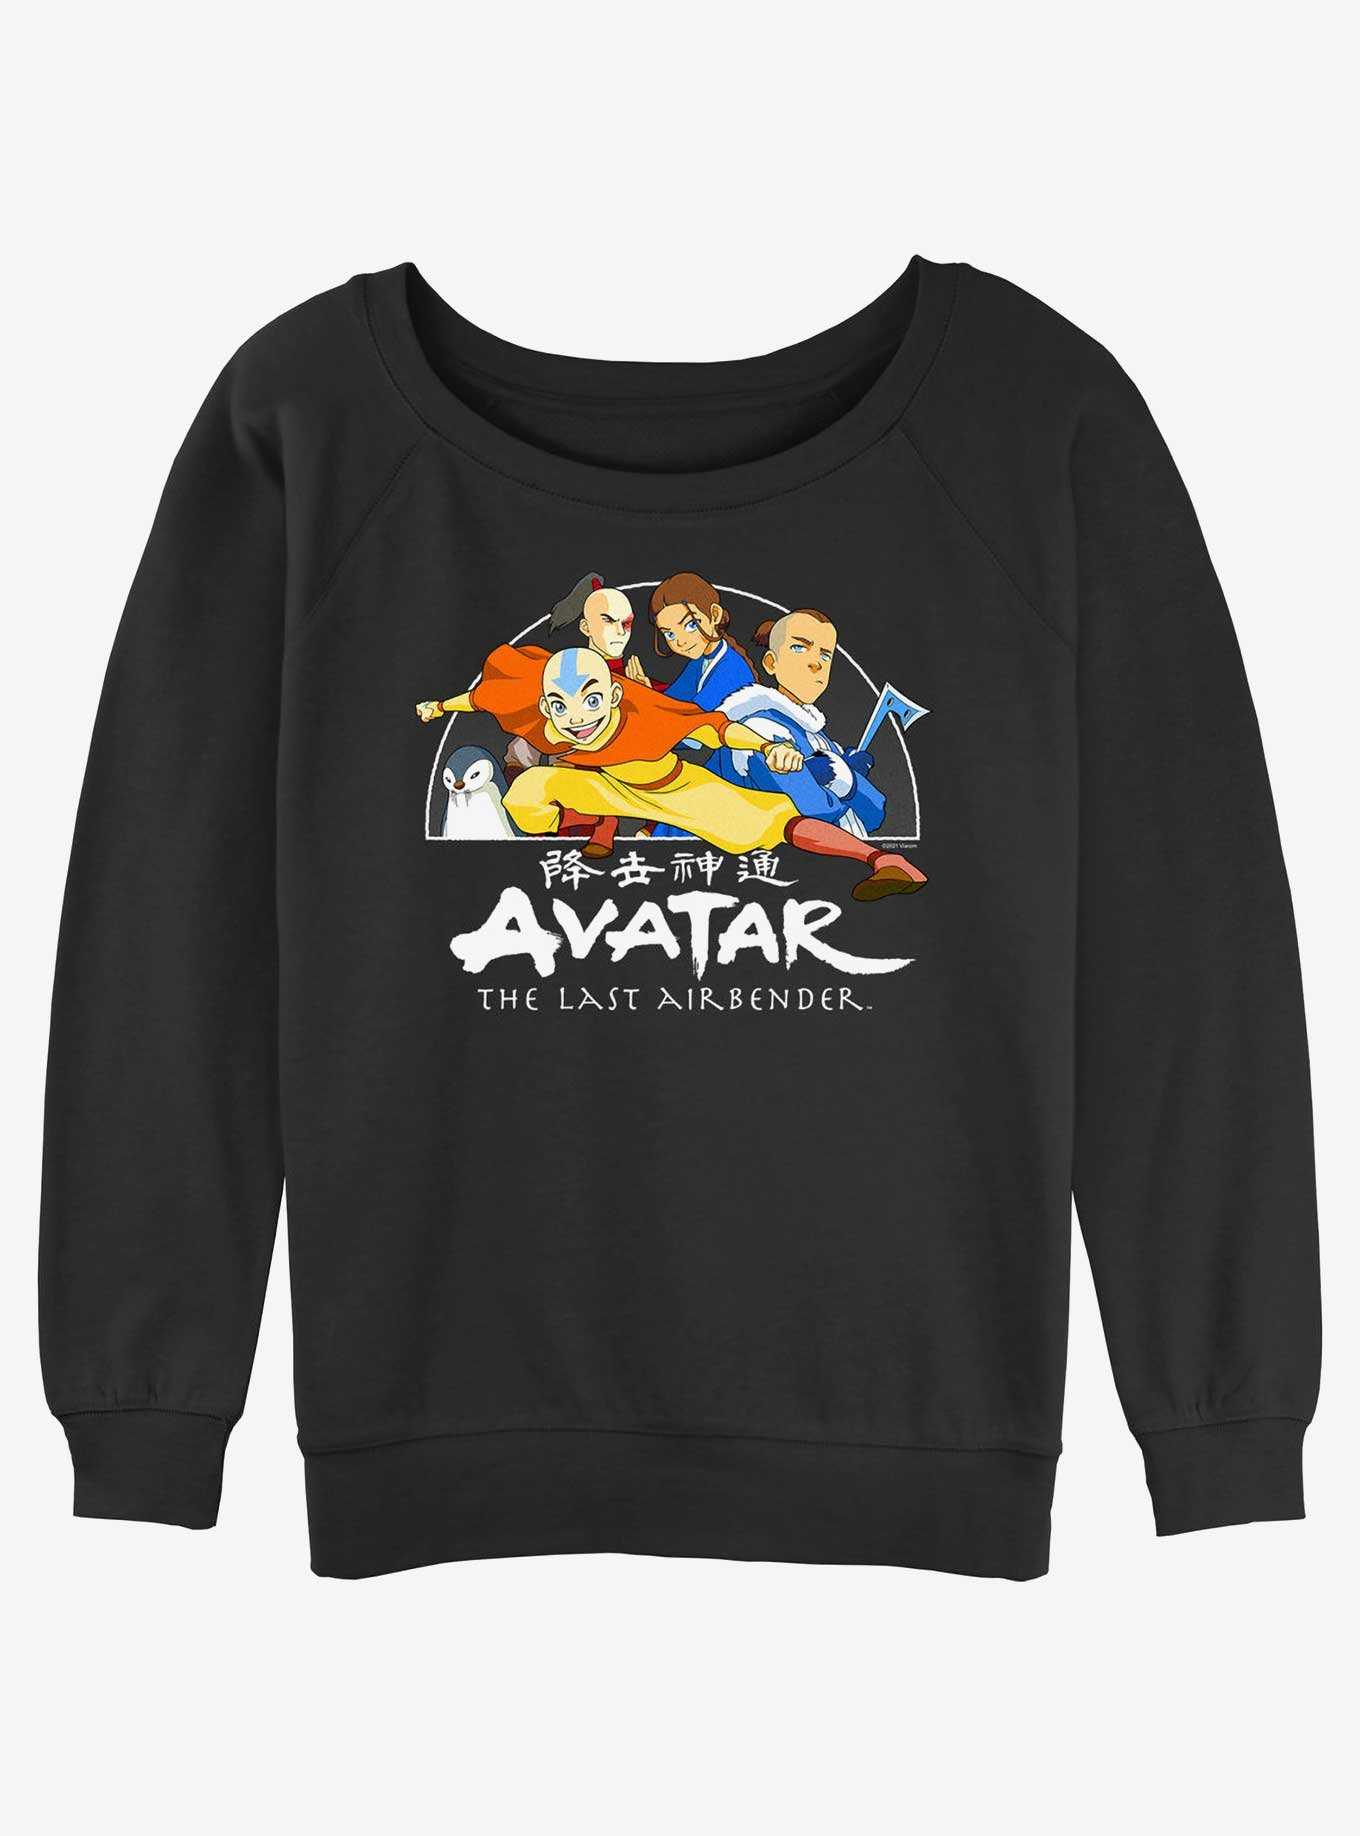 Avatar: The Last Airbender Ready For Action Womens Slouchy Sweatshirt, , hi-res